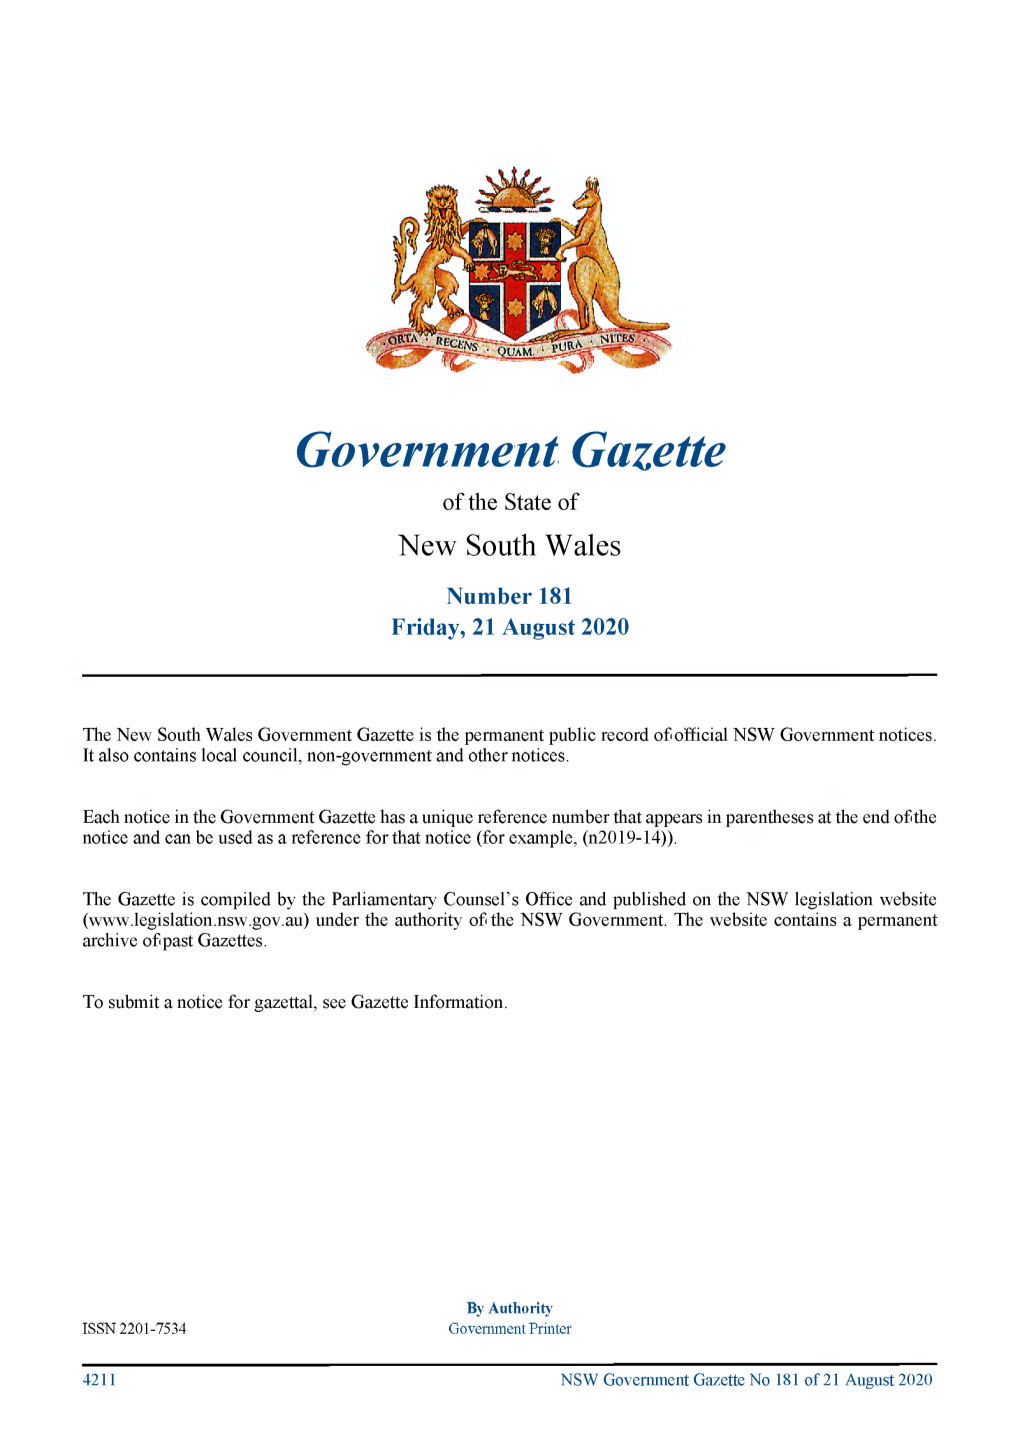 Government Gazette No 181 of Friday 21 August 2020